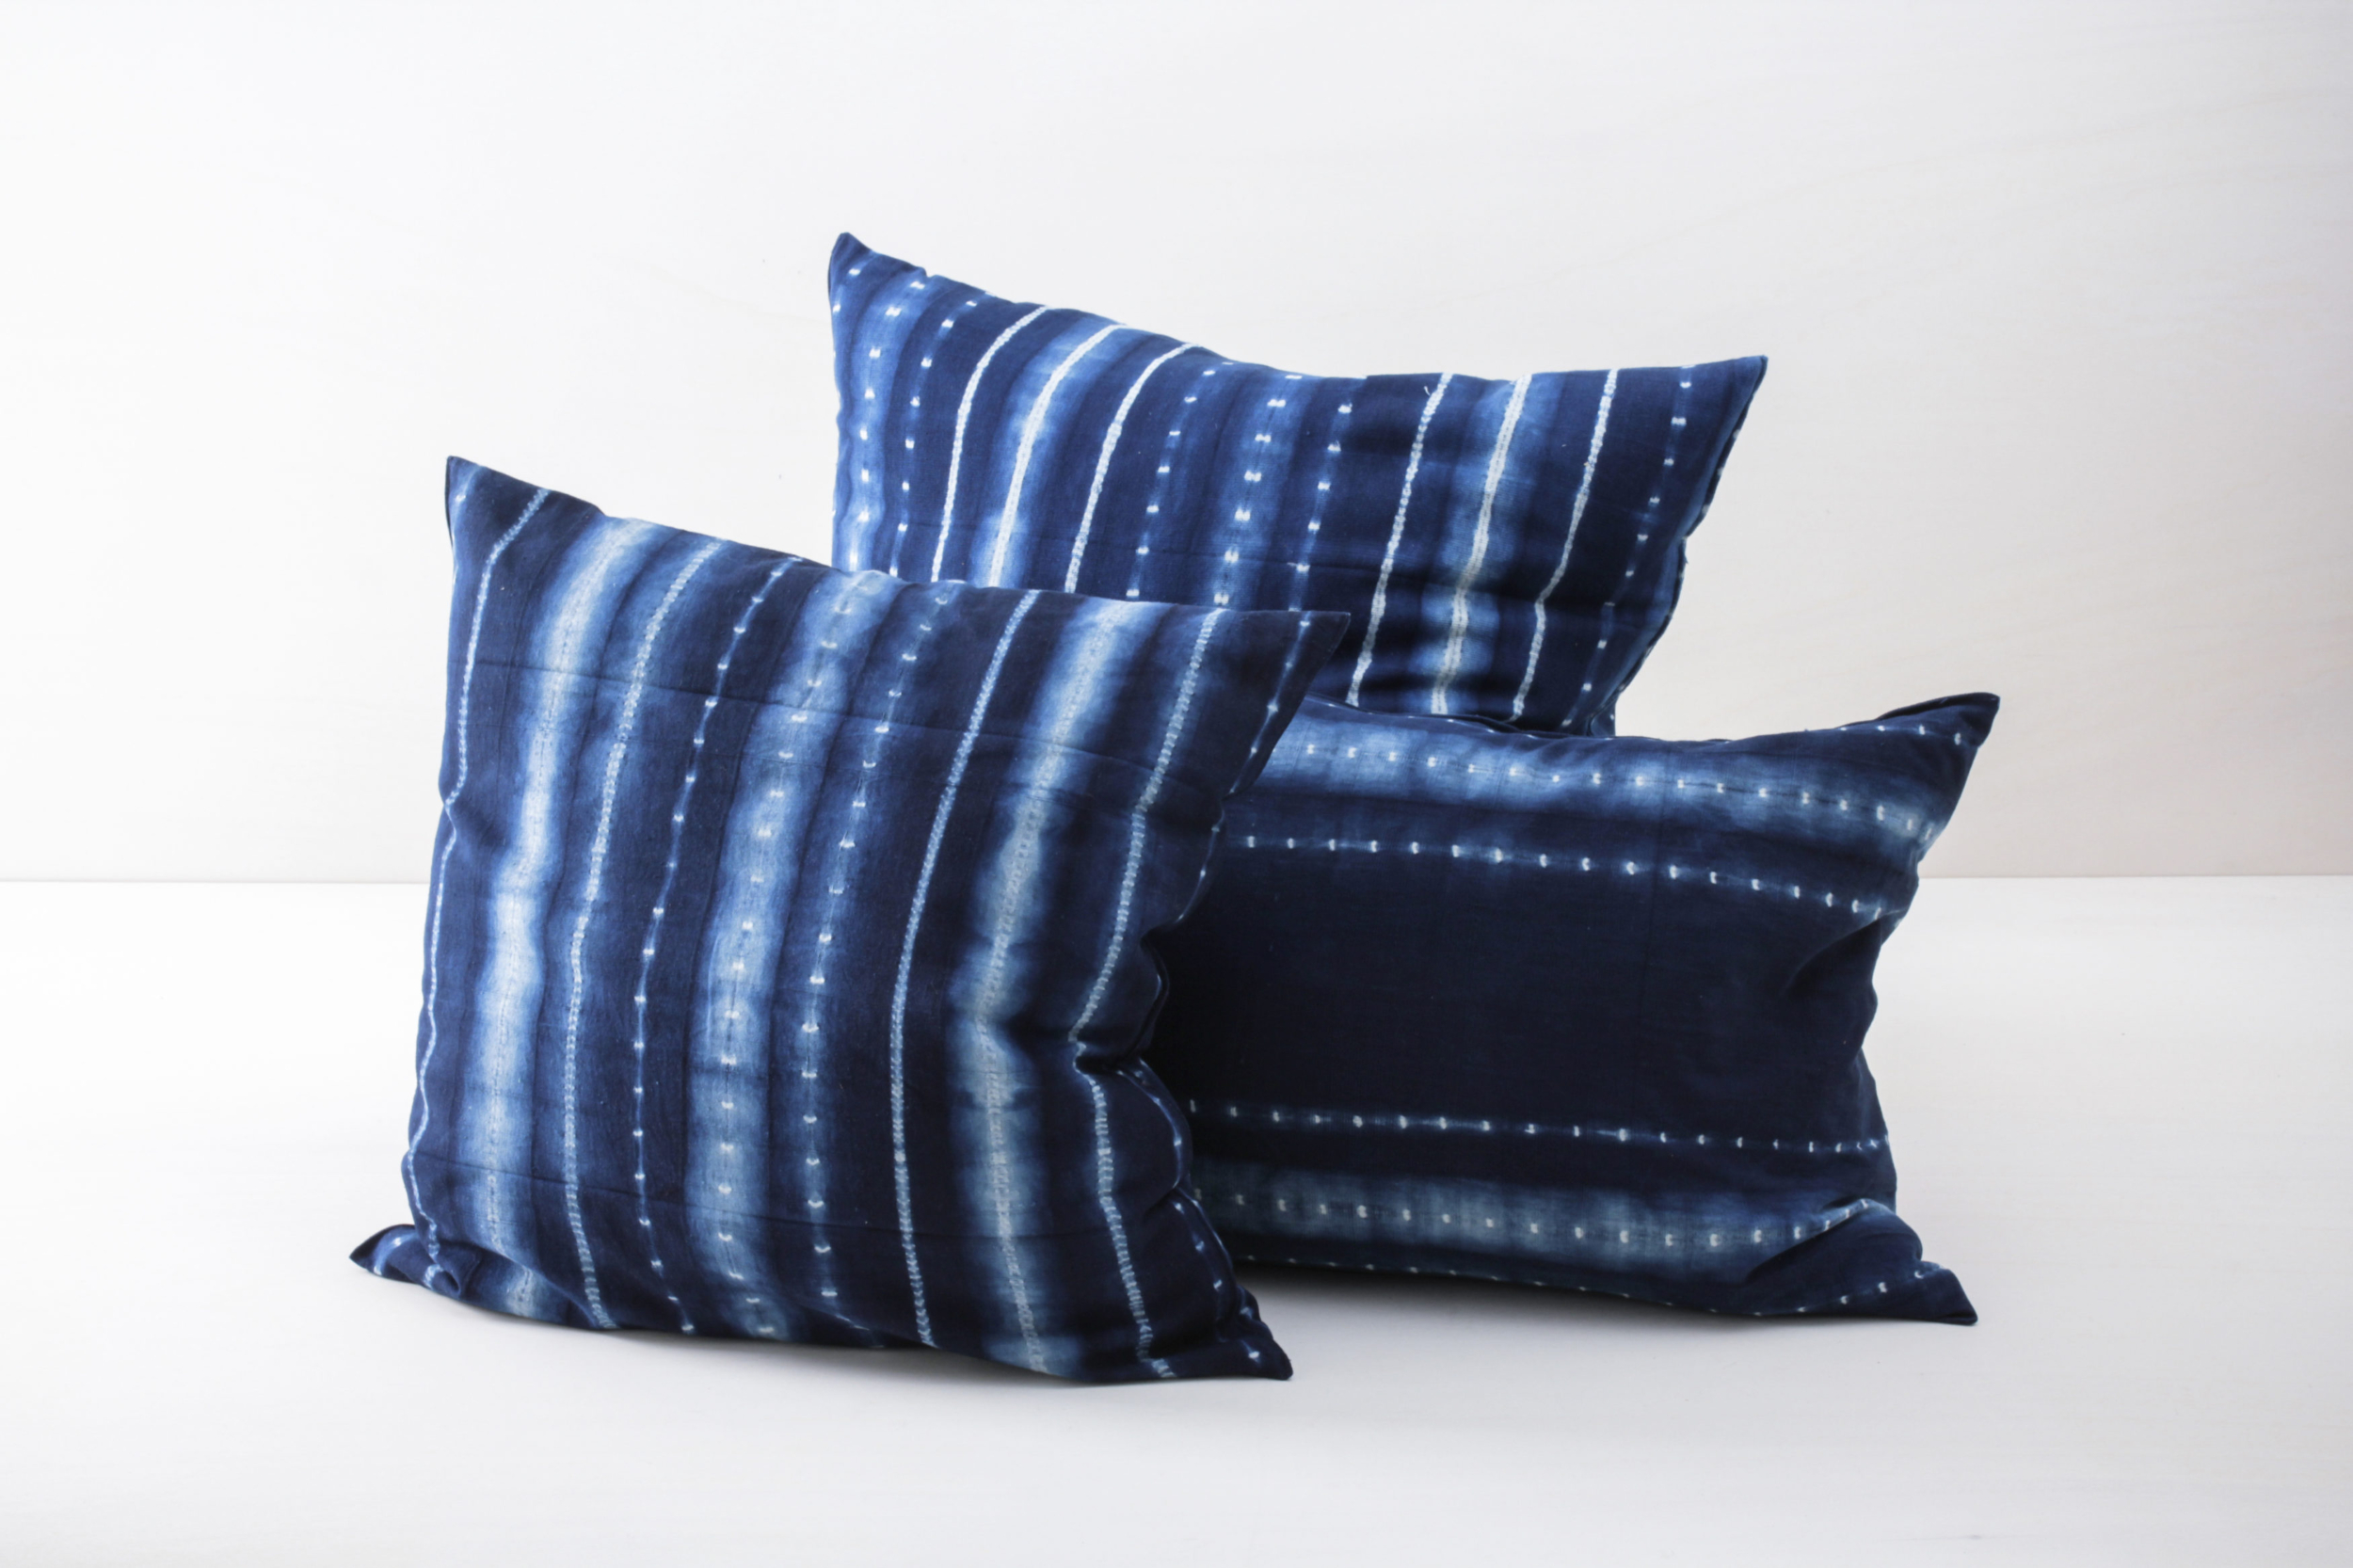  | The Vicente cotton pillows are from Guinea. The pillows are hand woven, hand dyed in indigo blue and square. The Indigo pillows are perfect for decorating lounge, picnic and garden parties.Matching the Vicente pillows we also rent out other pillows, blankets and mattresses. | 